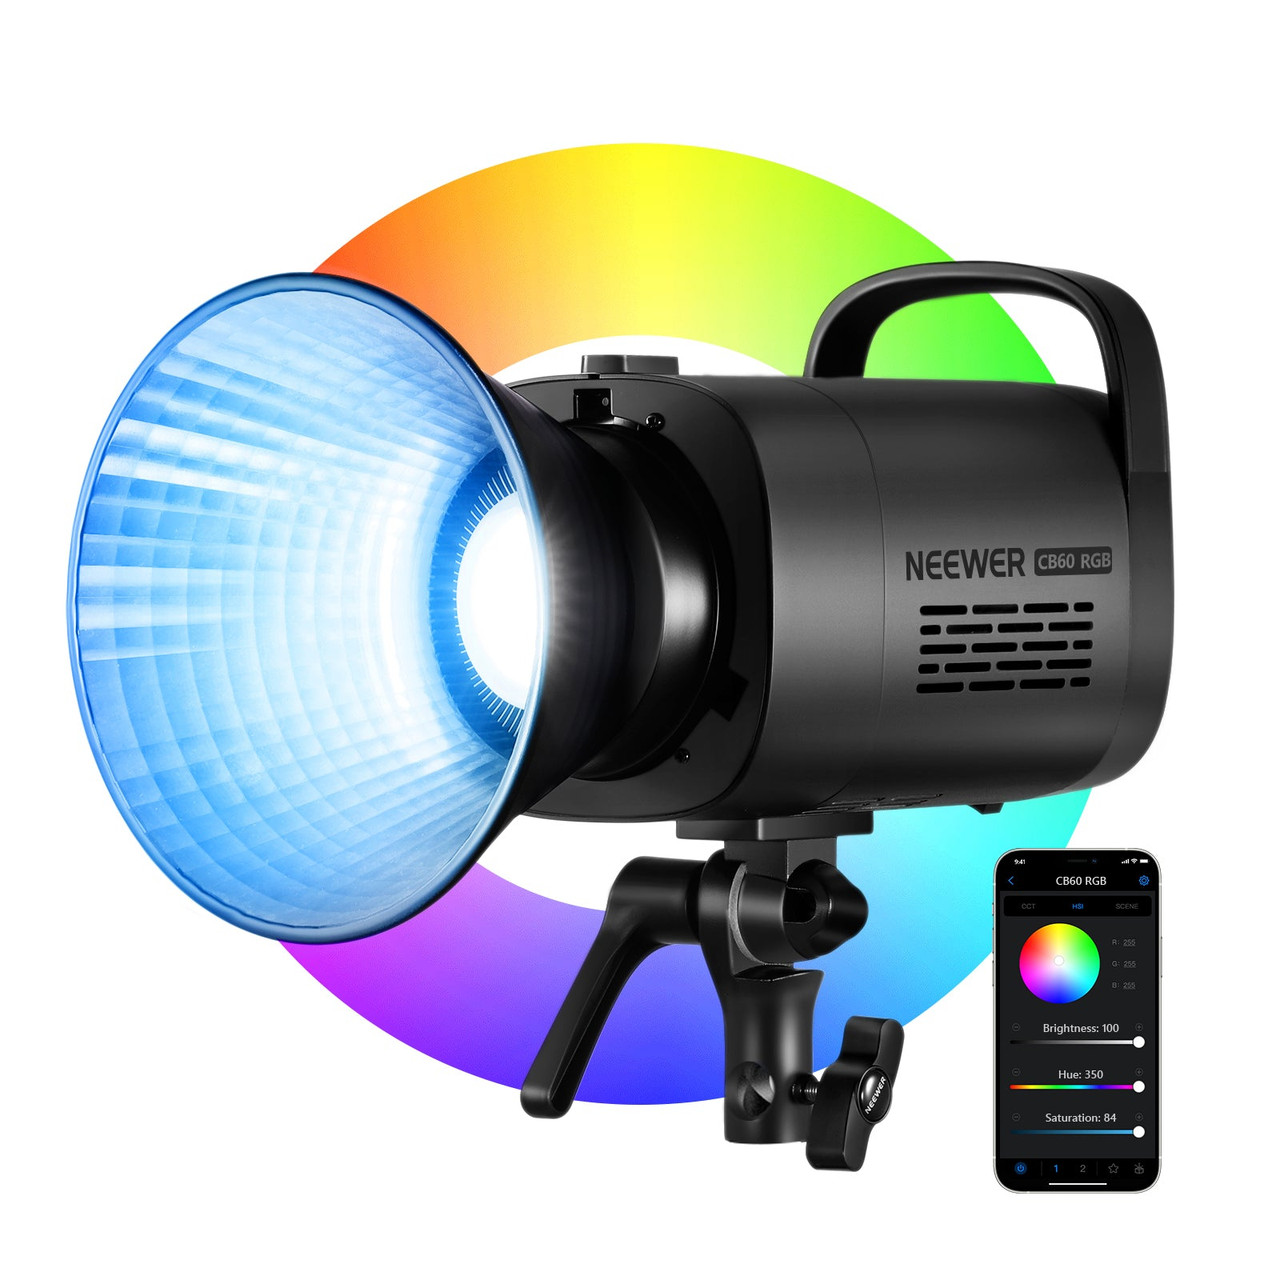 Neewer 660 RGB Lights Review - Change The Color & Mood Instantly!